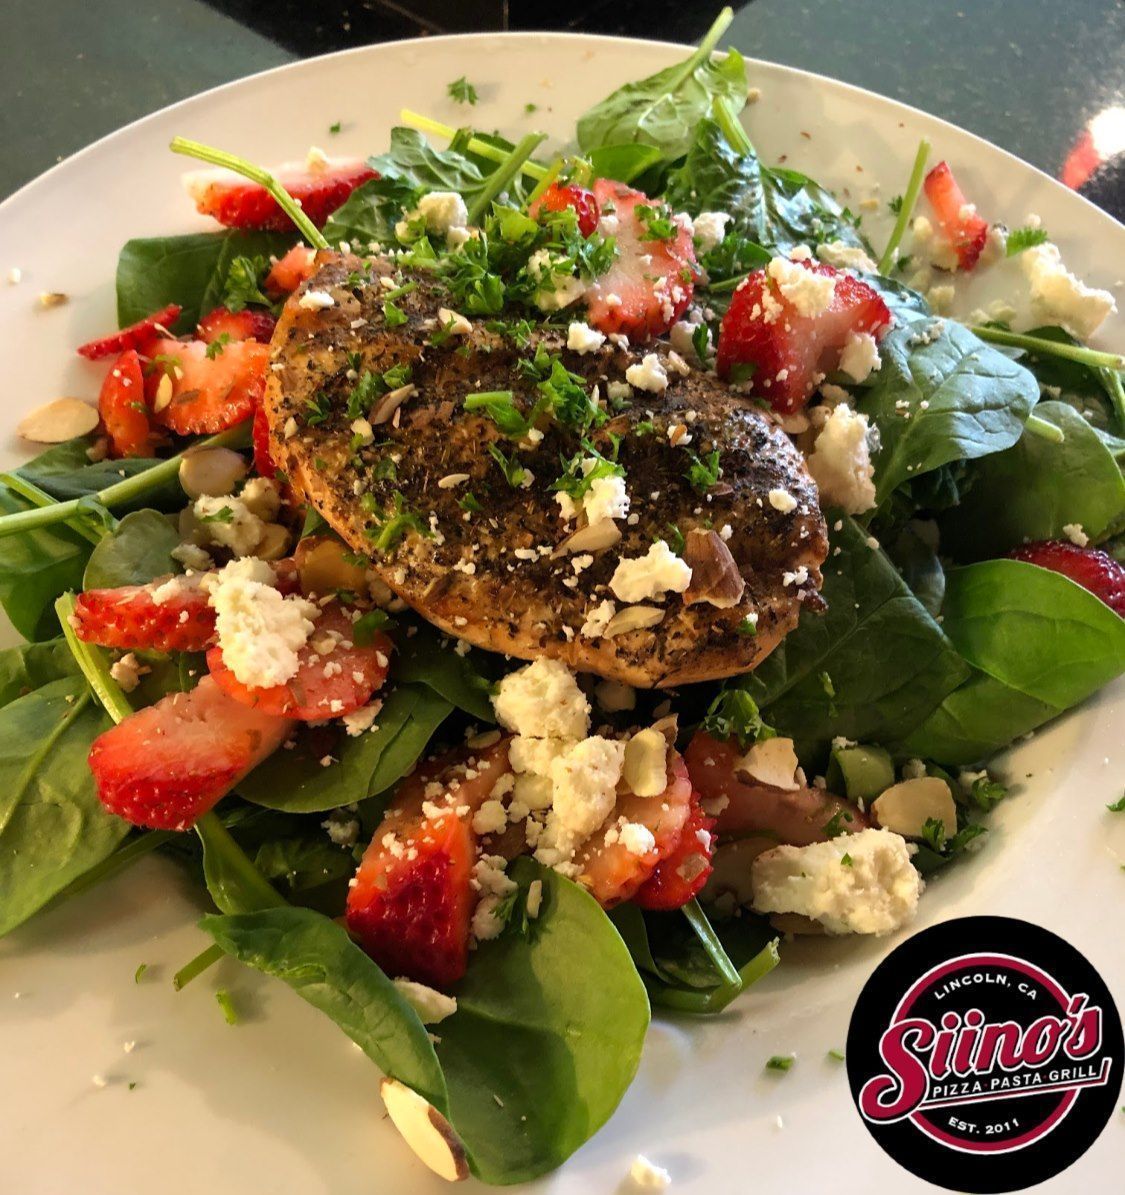 🍓 It's the perfect day to enjoy our Salmon Poppy Seed Salad ~ Herbed grilled salmon over a bed of baby spinach, strawberries, sliced almonds & feta cheese. Served with poppy seed dressing. Delicious! See ya at Siino's! 

#Siinos #Pizza #Pasta #Grill #DineLocal #PlacerCounty